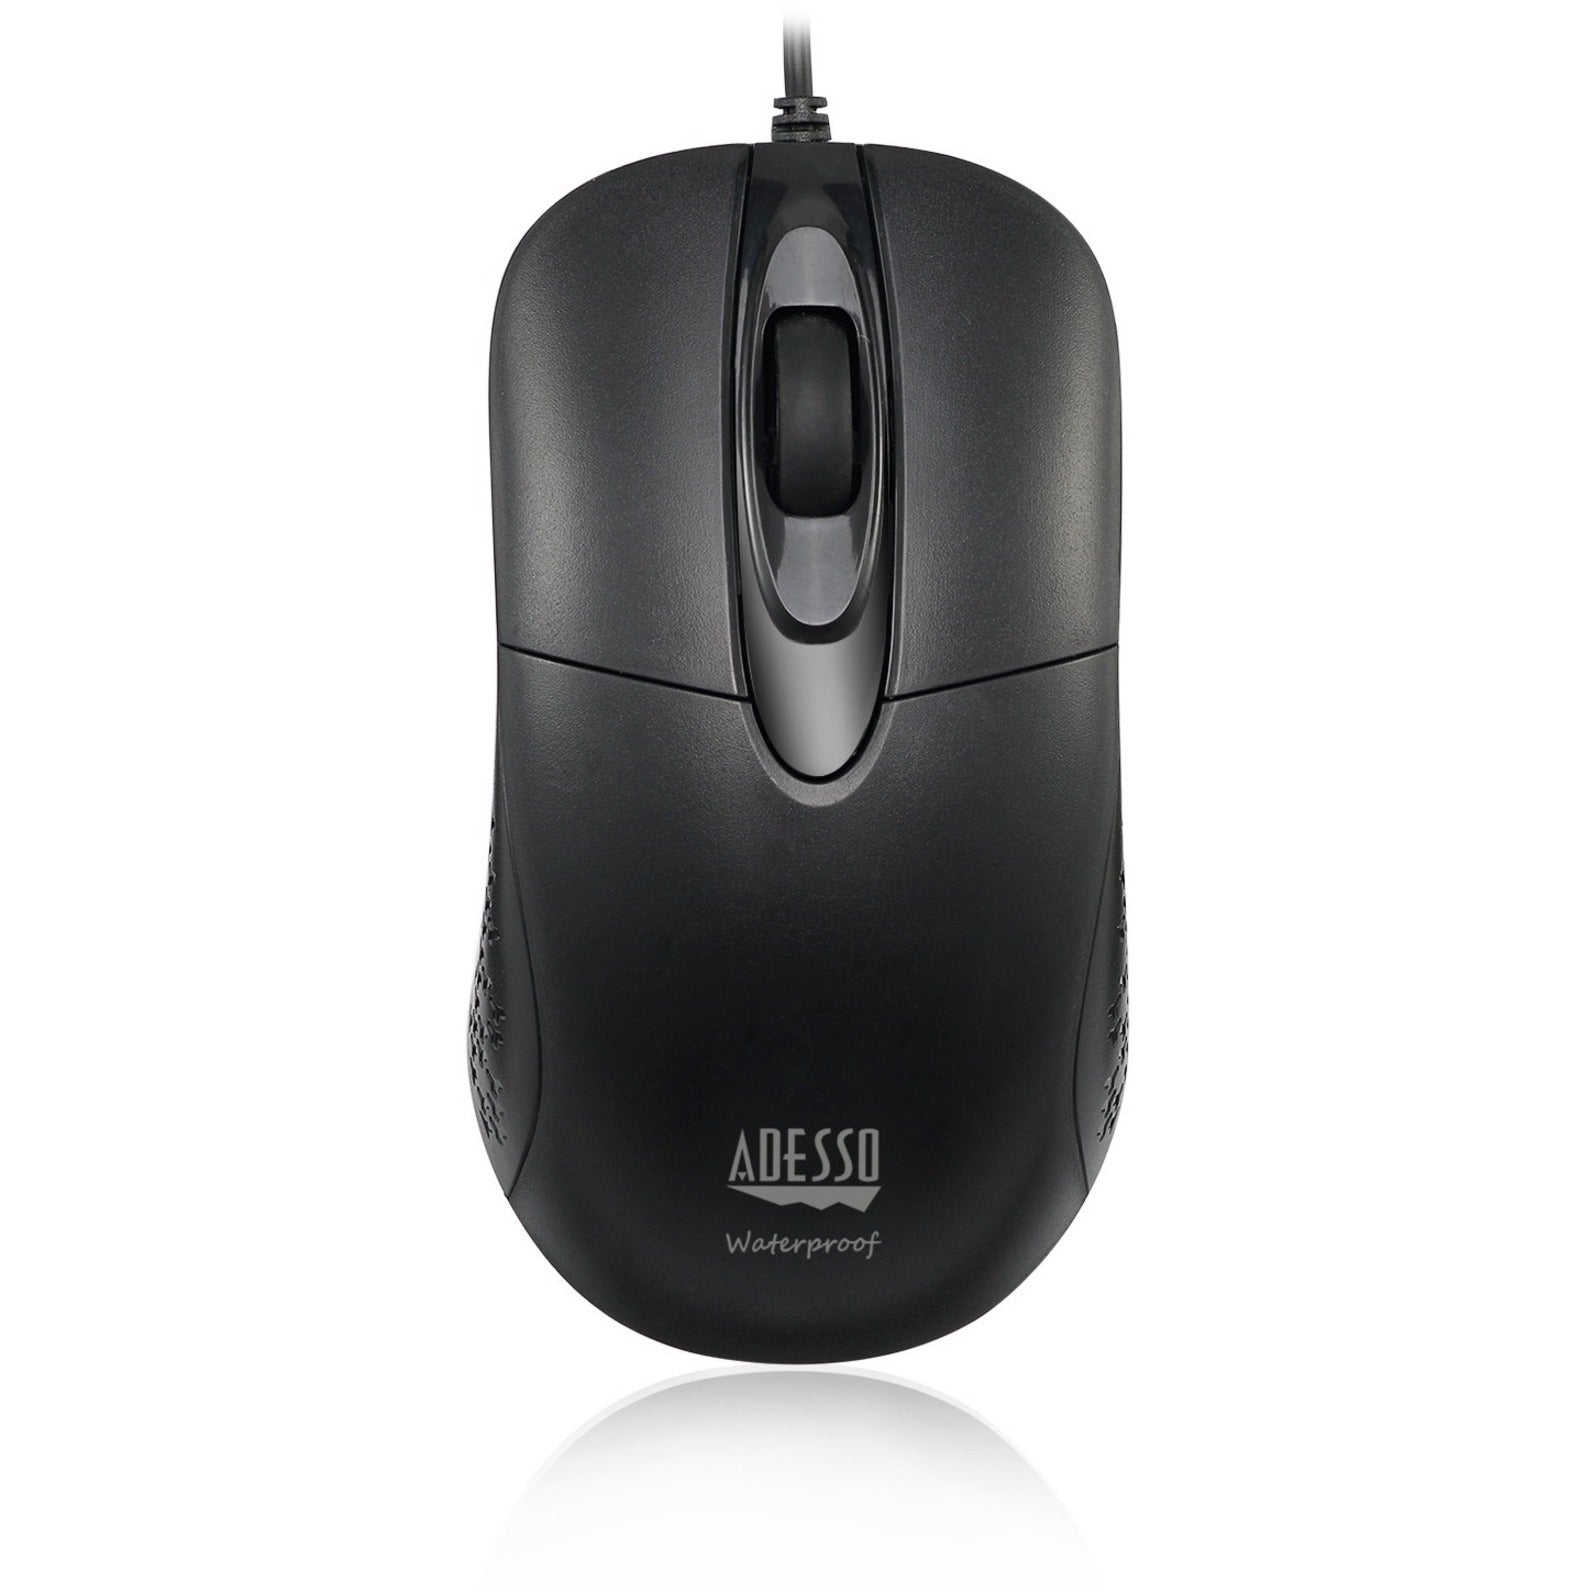 Adesso IMOUSE W4 Waterproof Antimicrobial Optical Mouse, Ergonomic Fit, Scroll Wheel, 1000 dpi